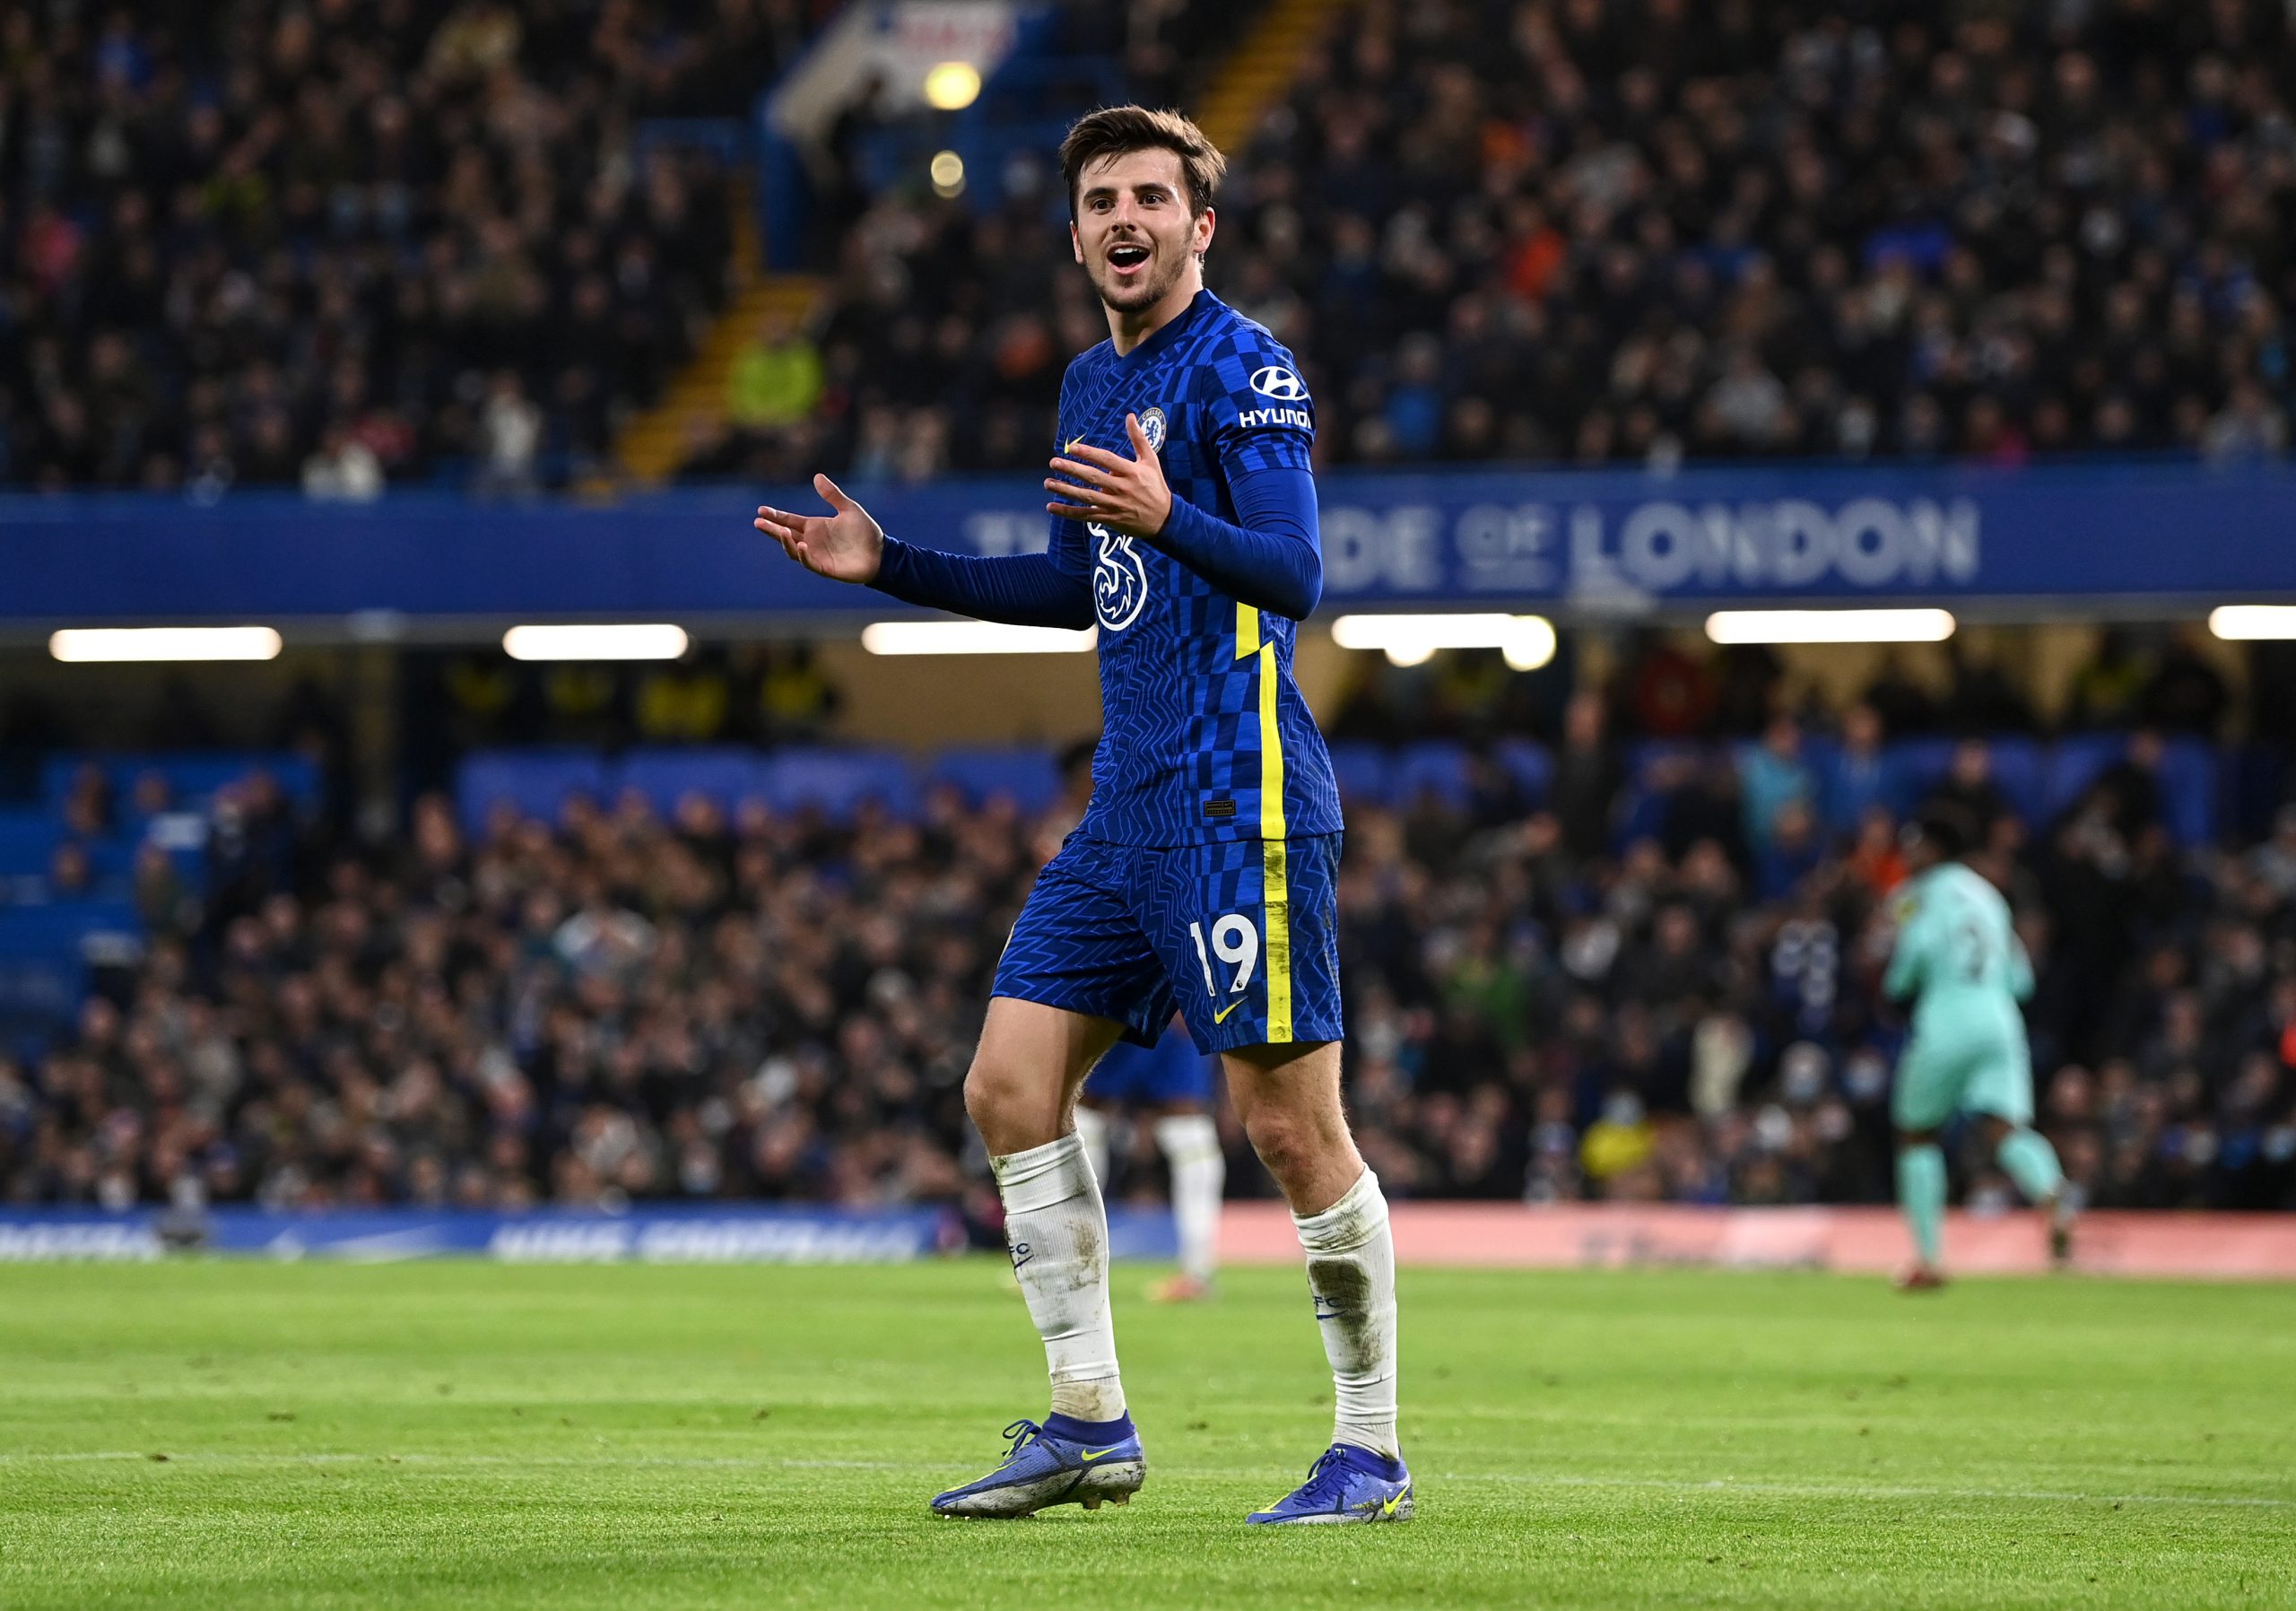 LONDON, ENGLAND - DECEMBER 29: Mason Mount of Chelsea reacts during the Premier League match between Chelsea and Brighton & Hove Albion at Stamford Bridge on December 29, 2021 in London, England. (Photo by Shaun Botterill/Getty Images)The 4th Official uses images provided by the following image agency: Getty Images (https://www.gettyimages.de/) Imago Images (https://www.imago-images.de/)